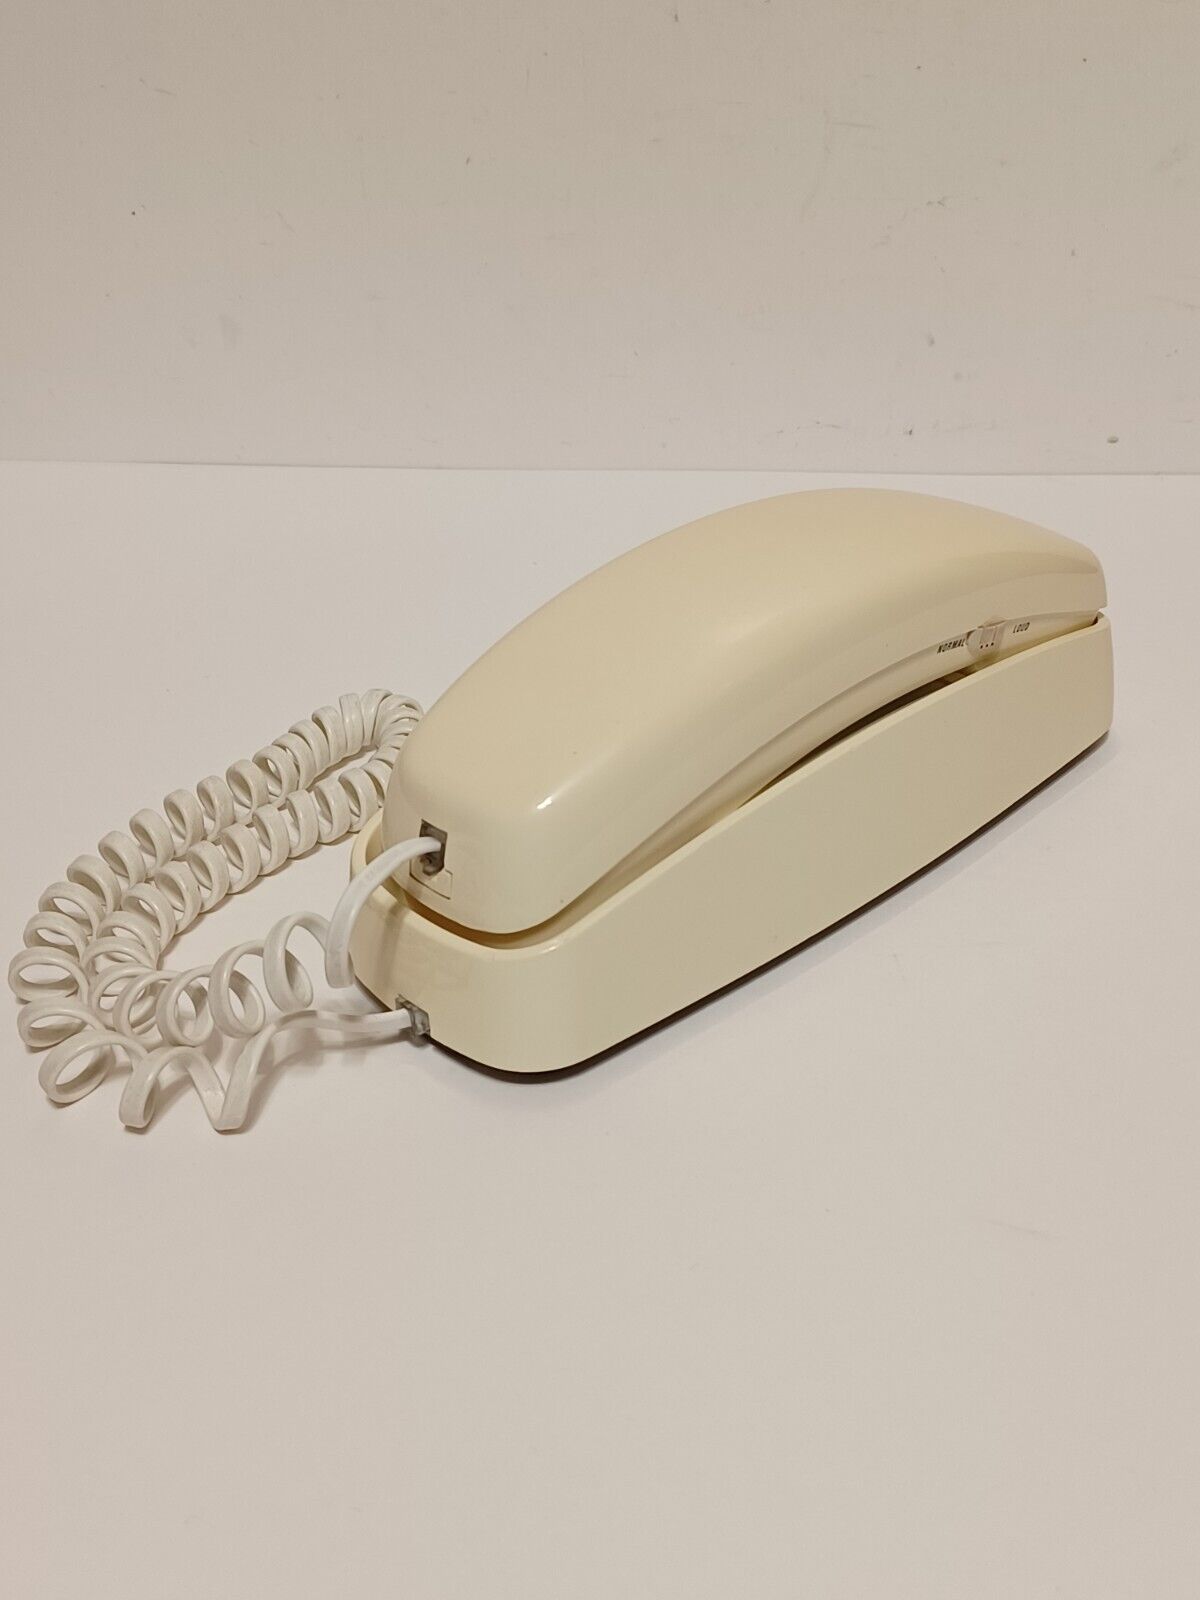 Vintage AT&T Trimline 230 Touchtone Dial Wall or Desk Use Telephone